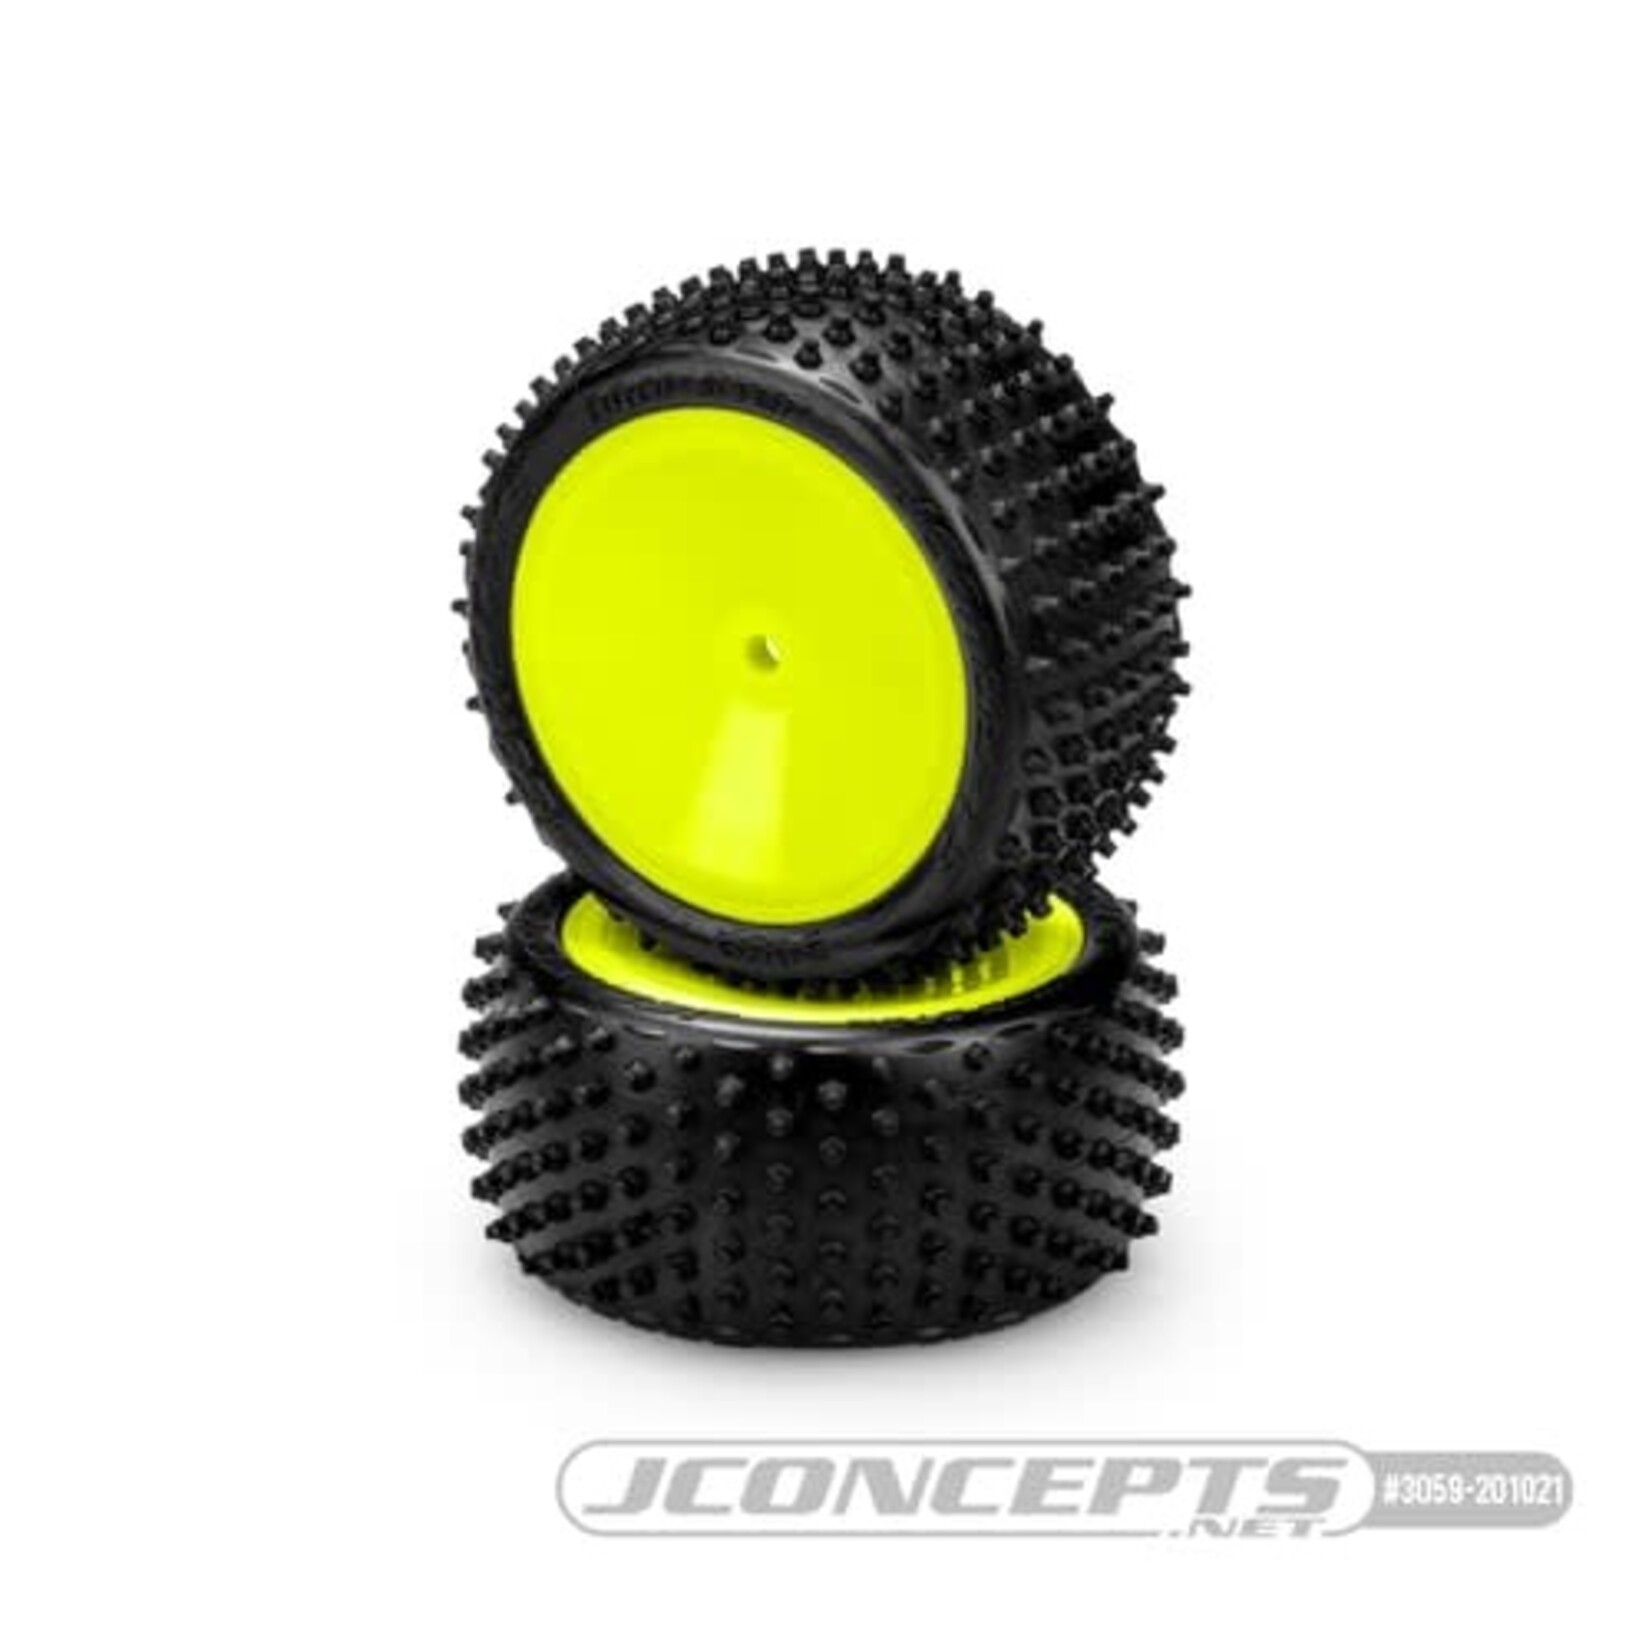 JConcepts JConcepts Drop Step 2.2" Pre-Mounted Rear Buggy Carpet Tires (Yellow) (2) (Pink) #3059-201021